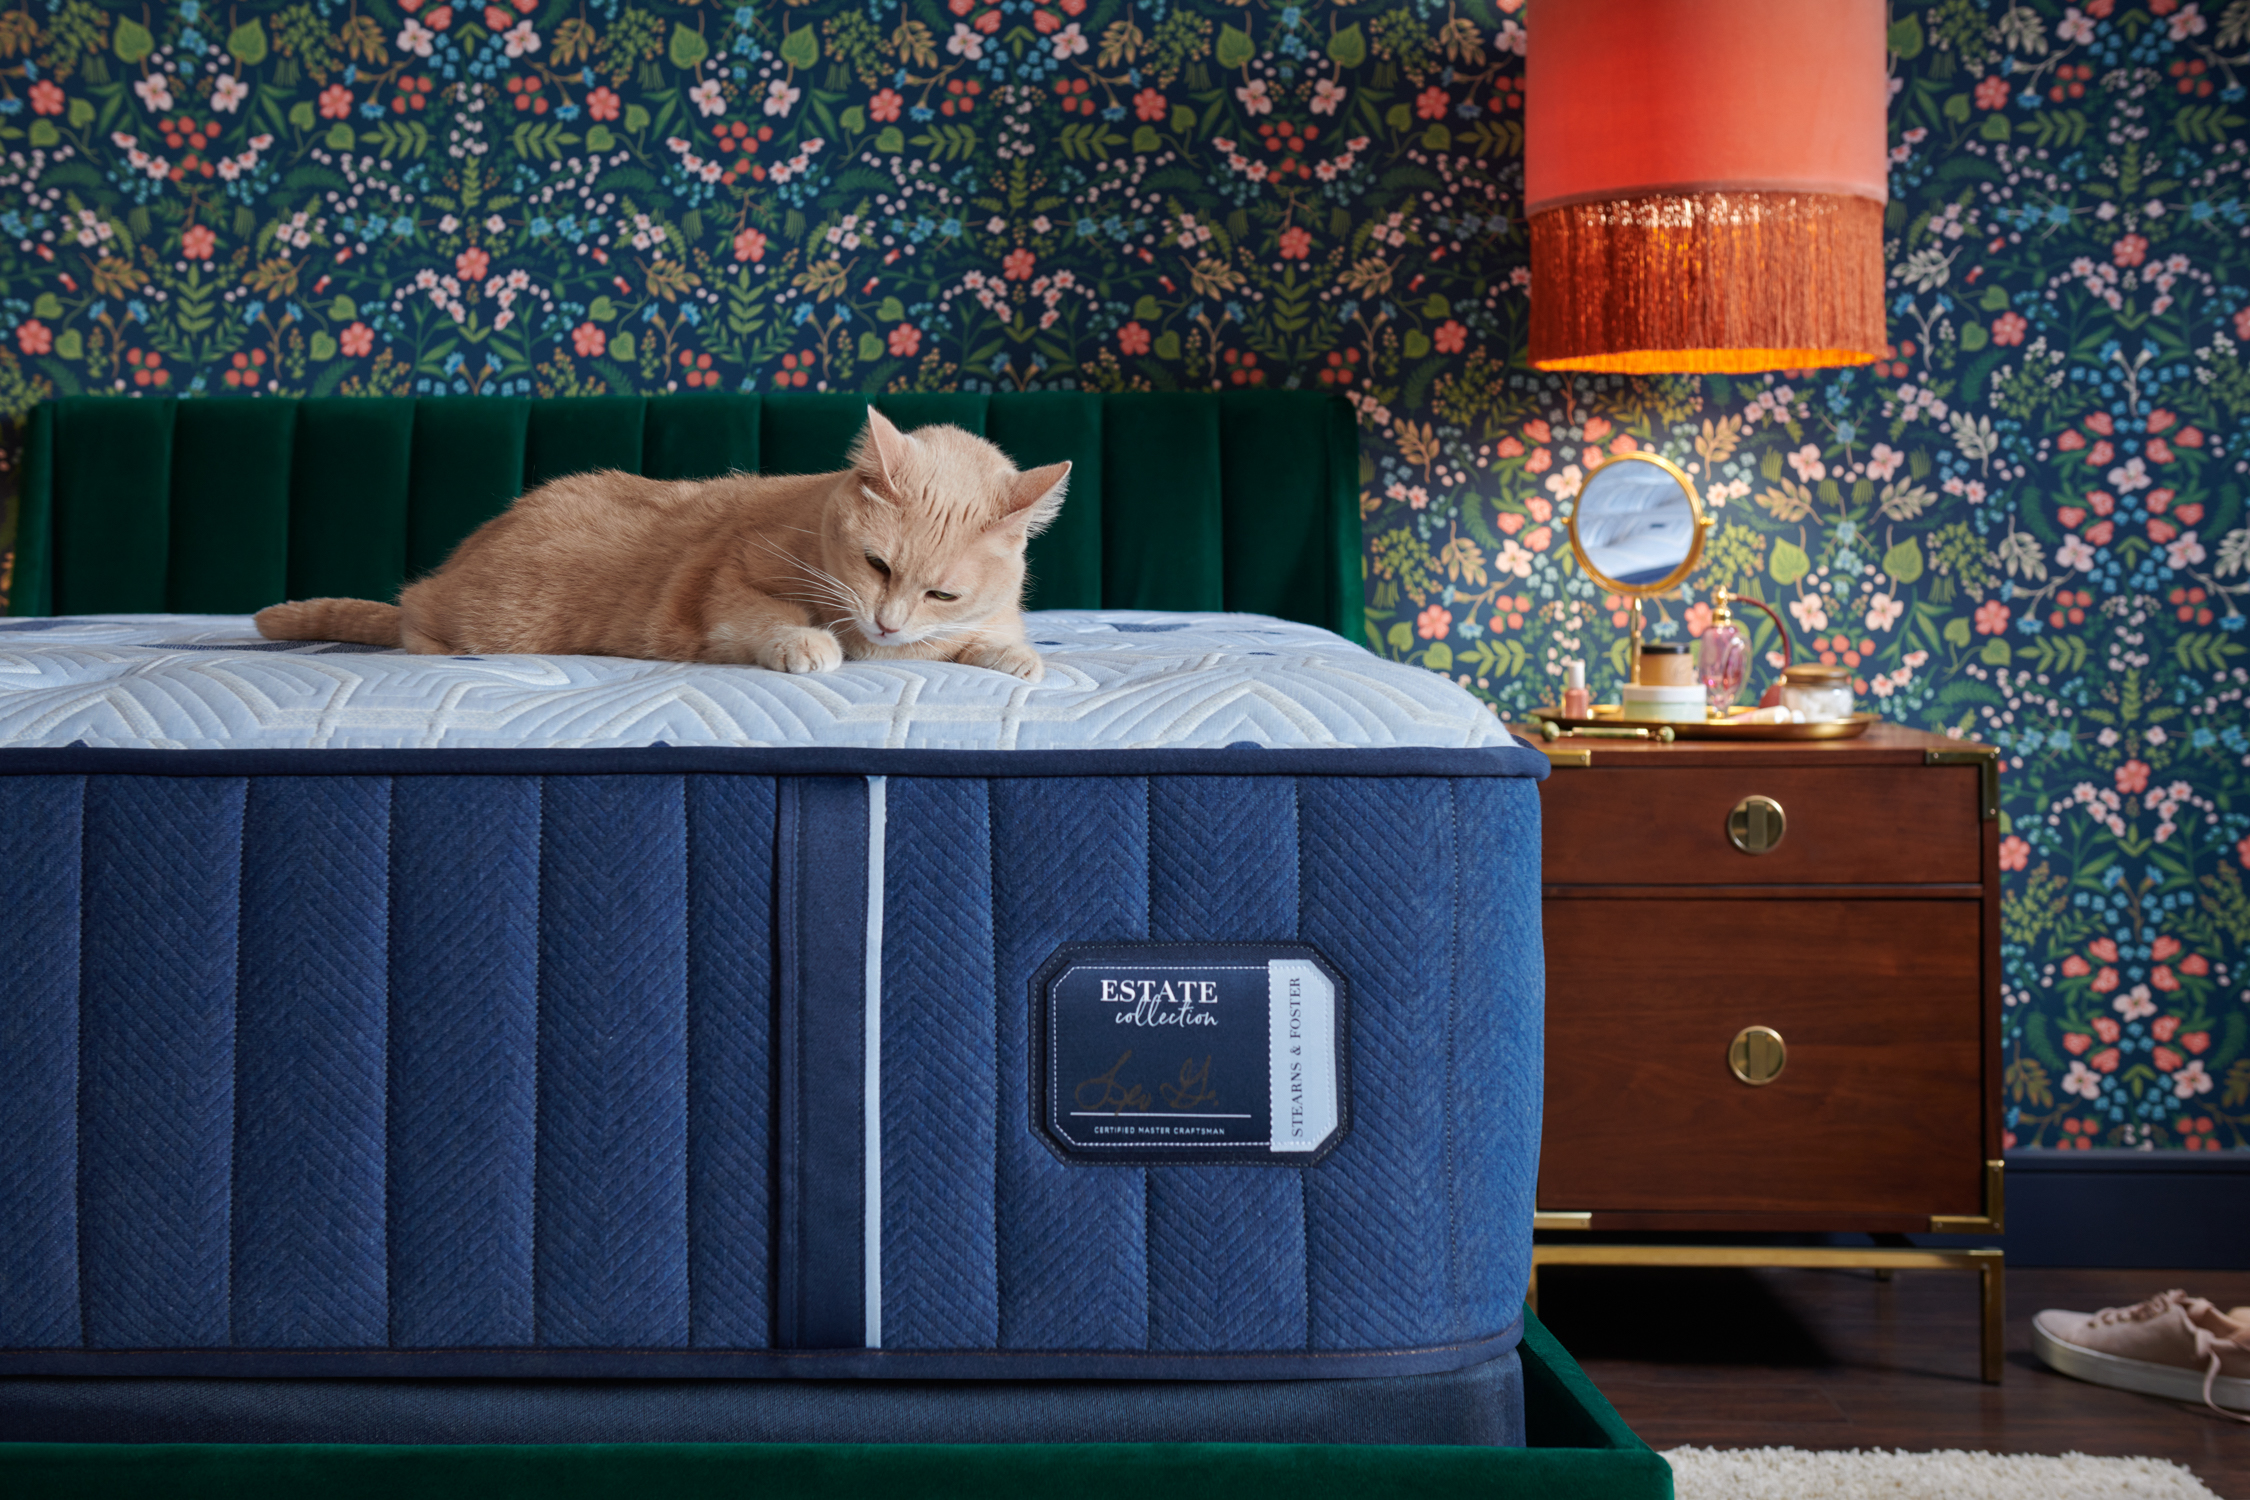 orange cat napping on Stearns & Foster Reserves Estate mattress placed on a velvet green bed frame that is against a dark floral accent wall